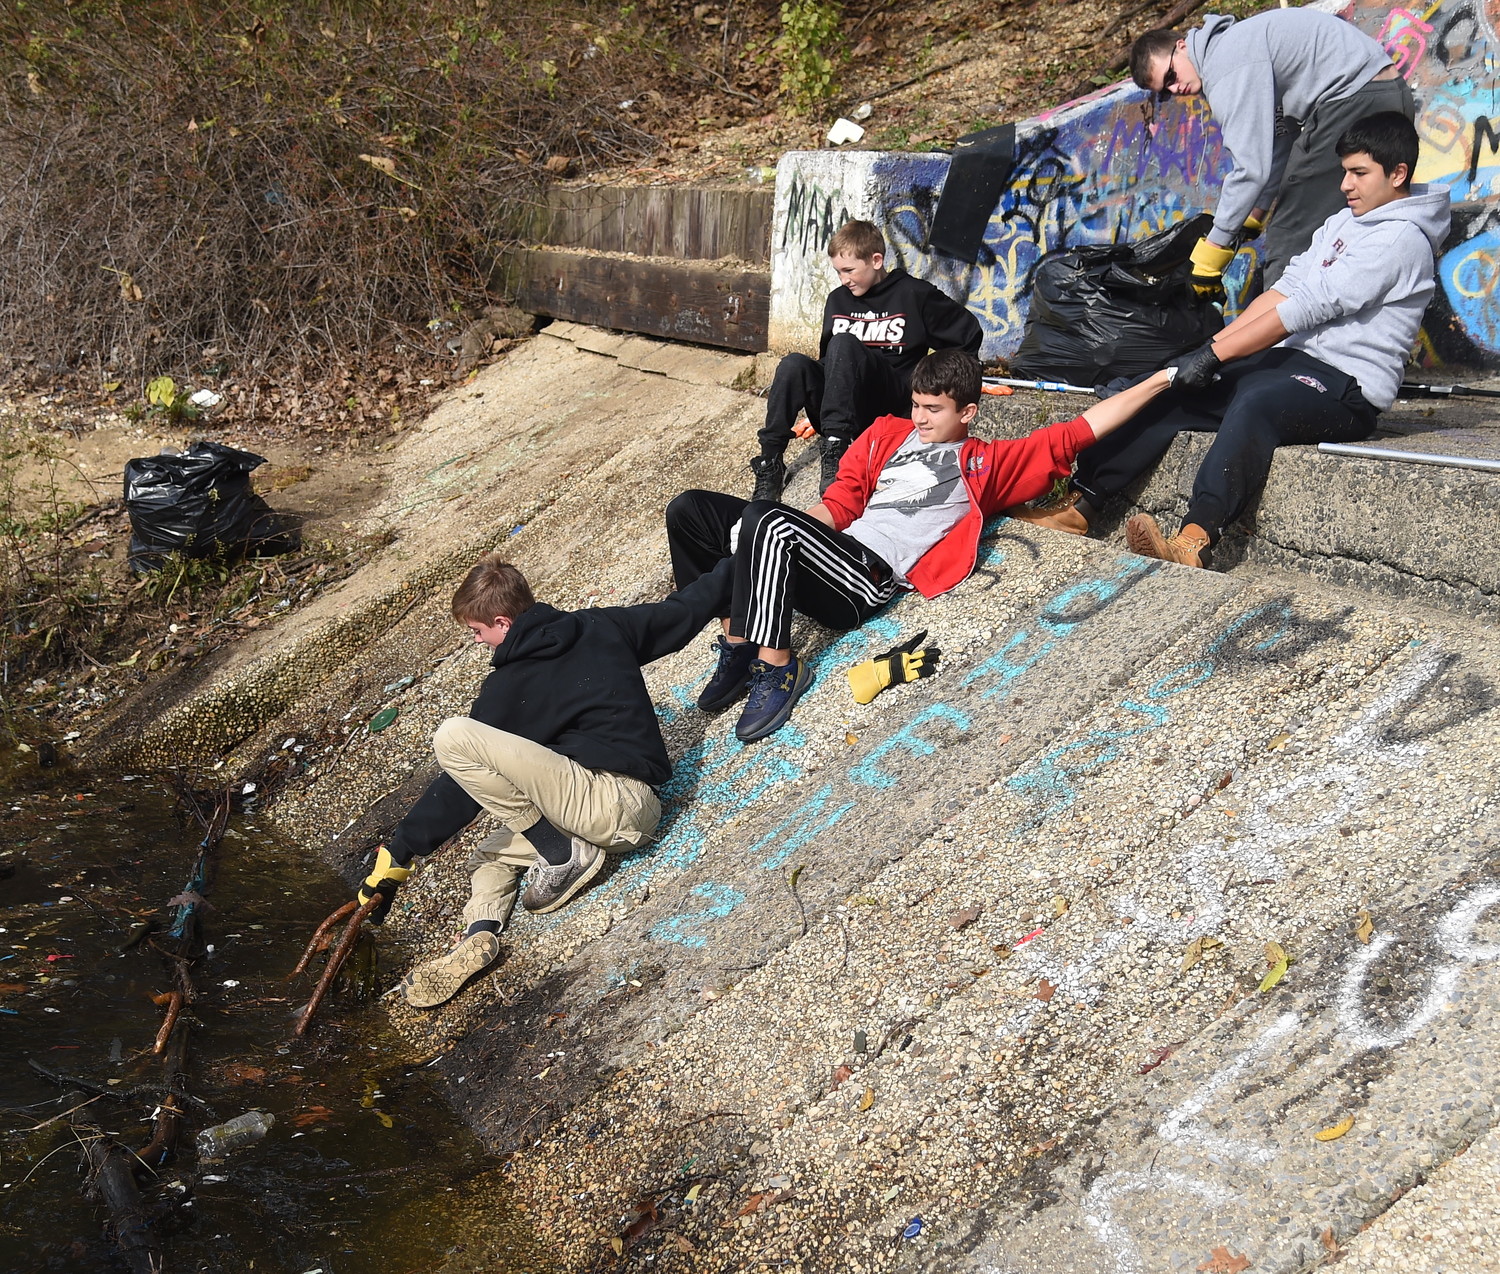 Forming a chain of support, Matthew Valverde, right, grasped Alexander Tepedino’s hand, middle, to keep Christopher Gregory from falling into the water as he pulled debris from the East Meadow bird sanctuary during a semi-annual cleanup on Nov. 4. Matthew Gregory, top, and Aidan Finneran looked on.